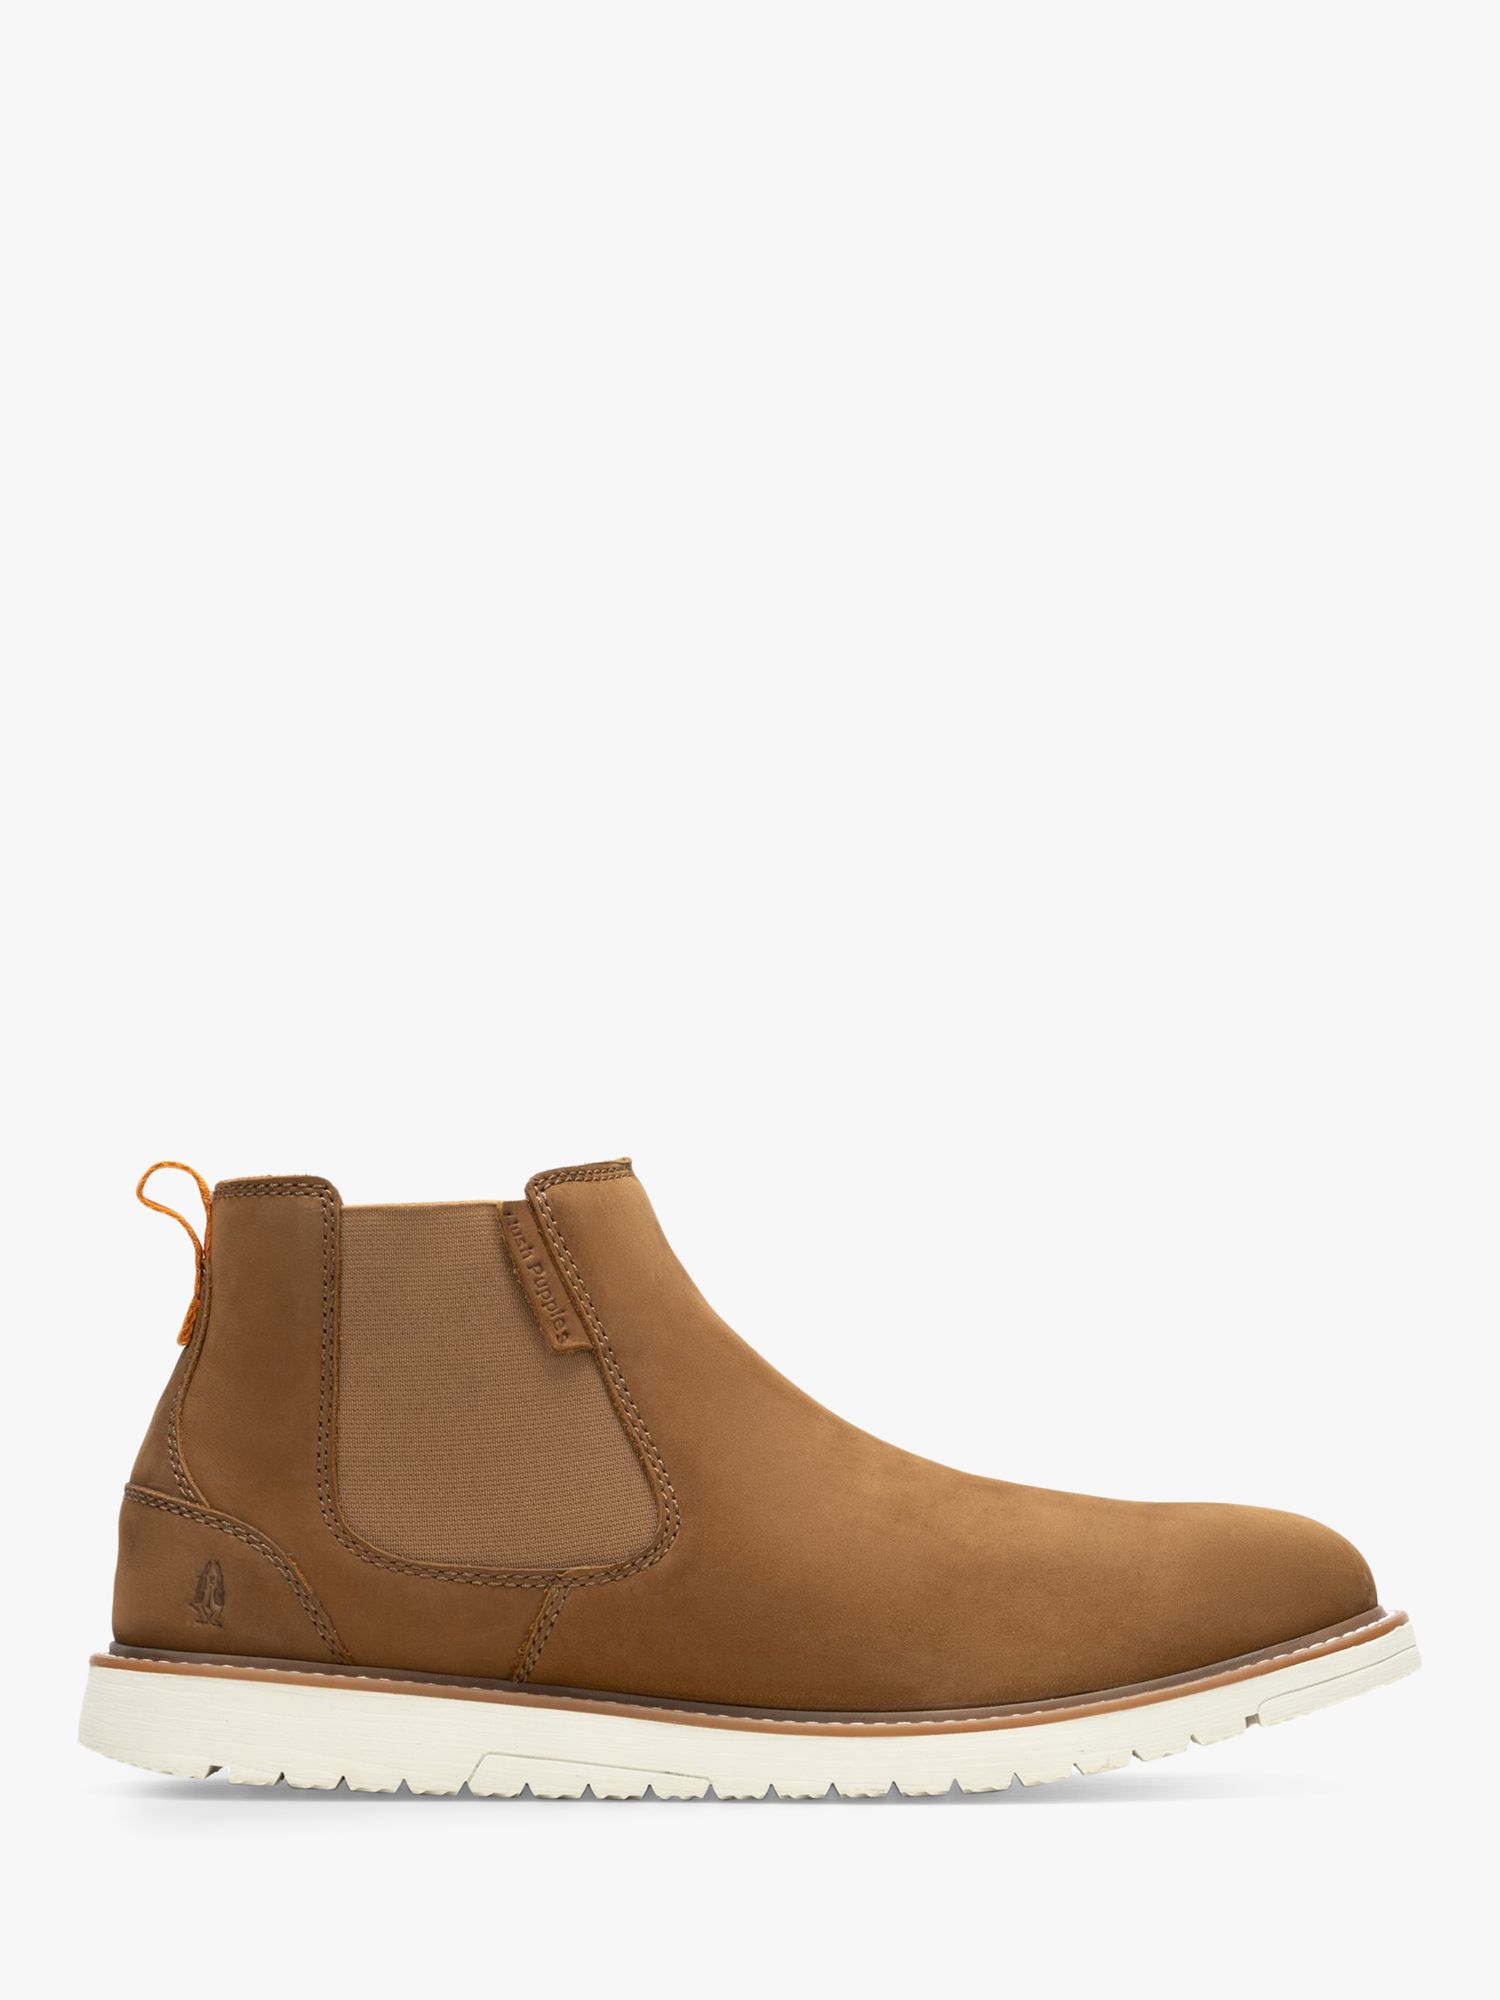 Hush Puppies Jenson Leather Chelsea Boots, Tan at John Lewis & Partners